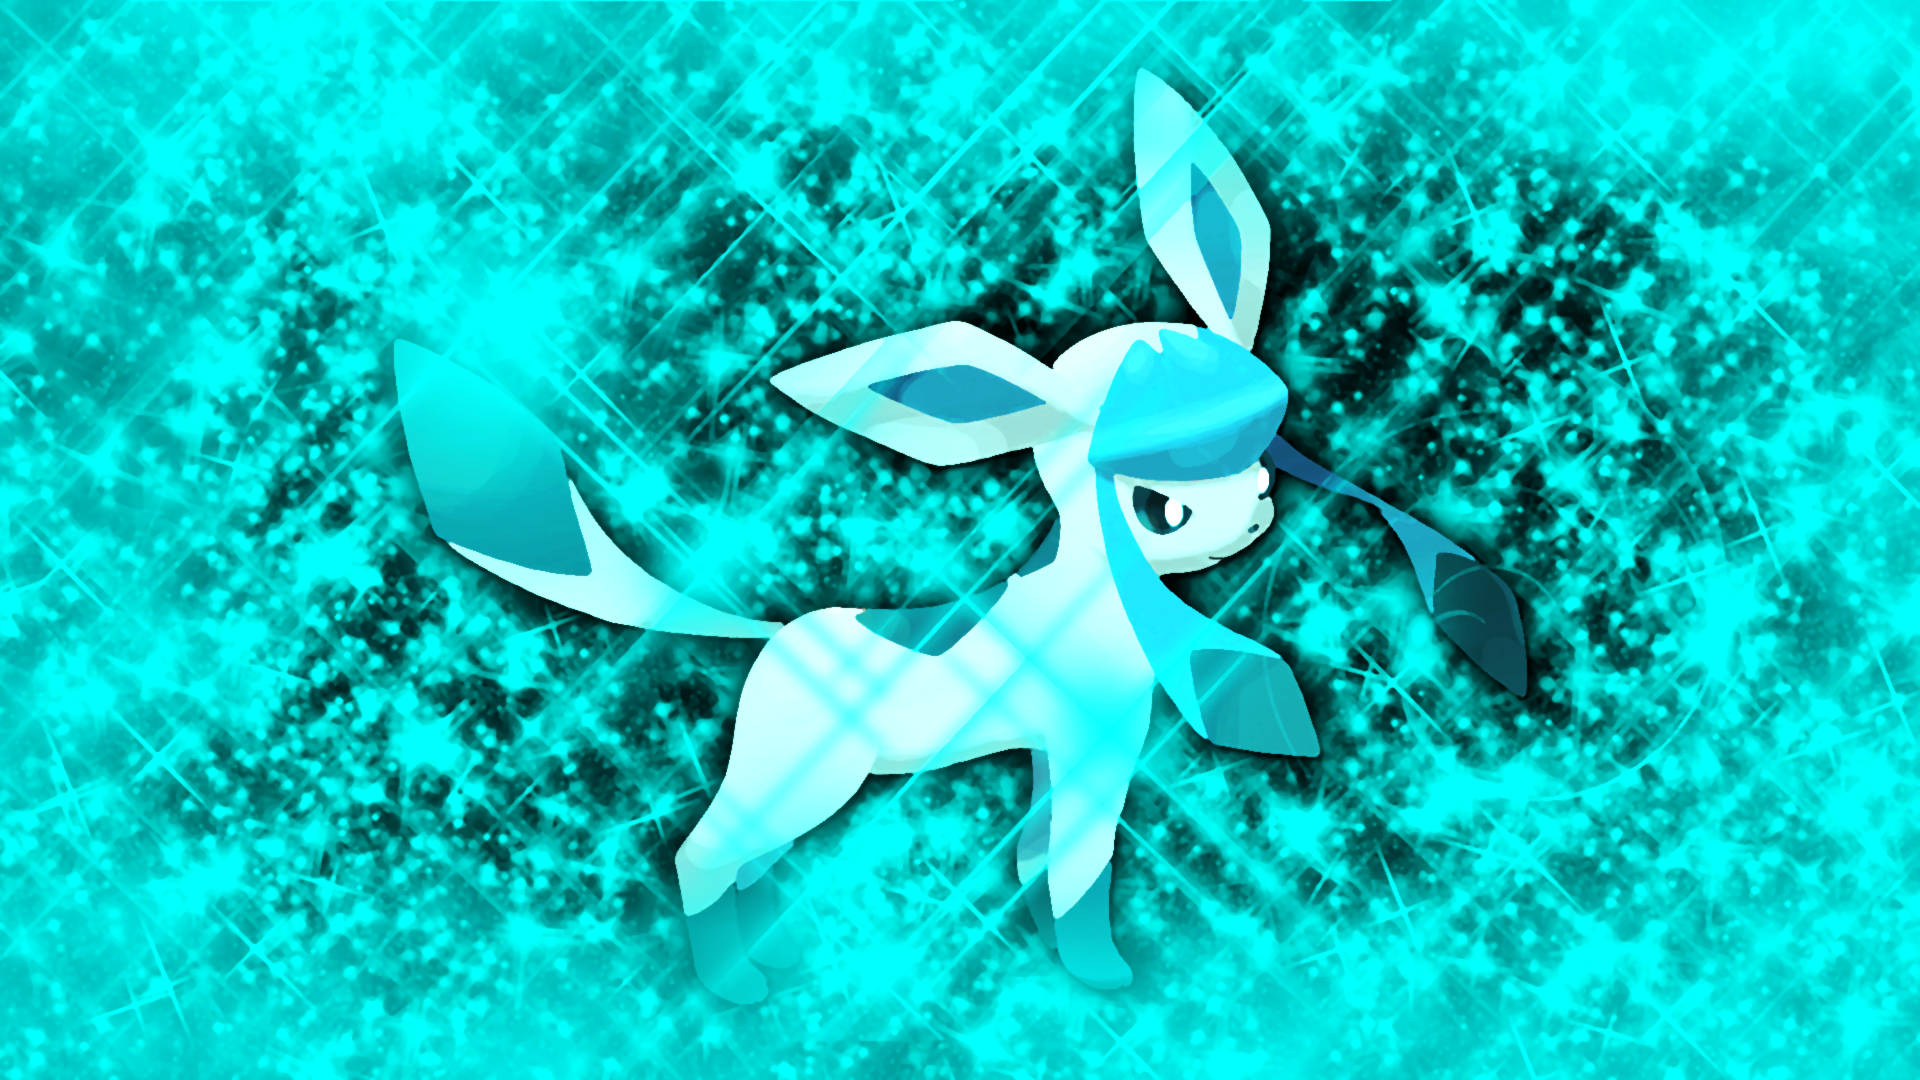 Sparkling Glaceon